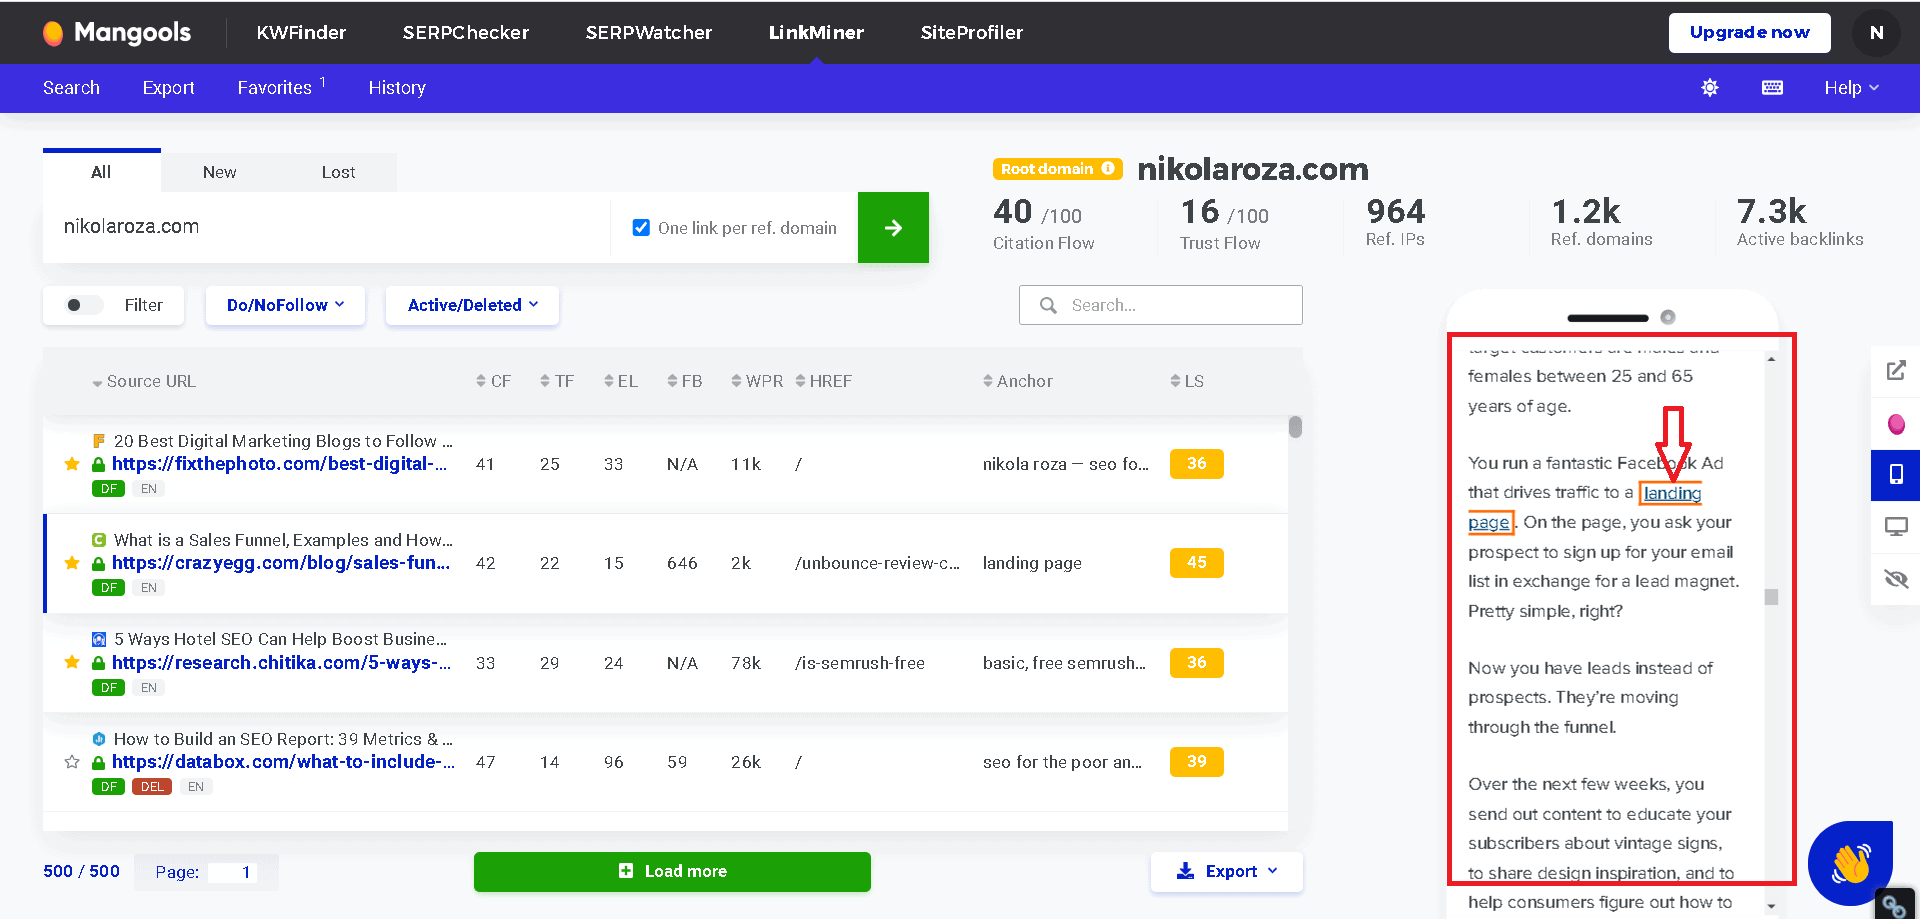 Link Miner backlink preview within Mangools dashboard